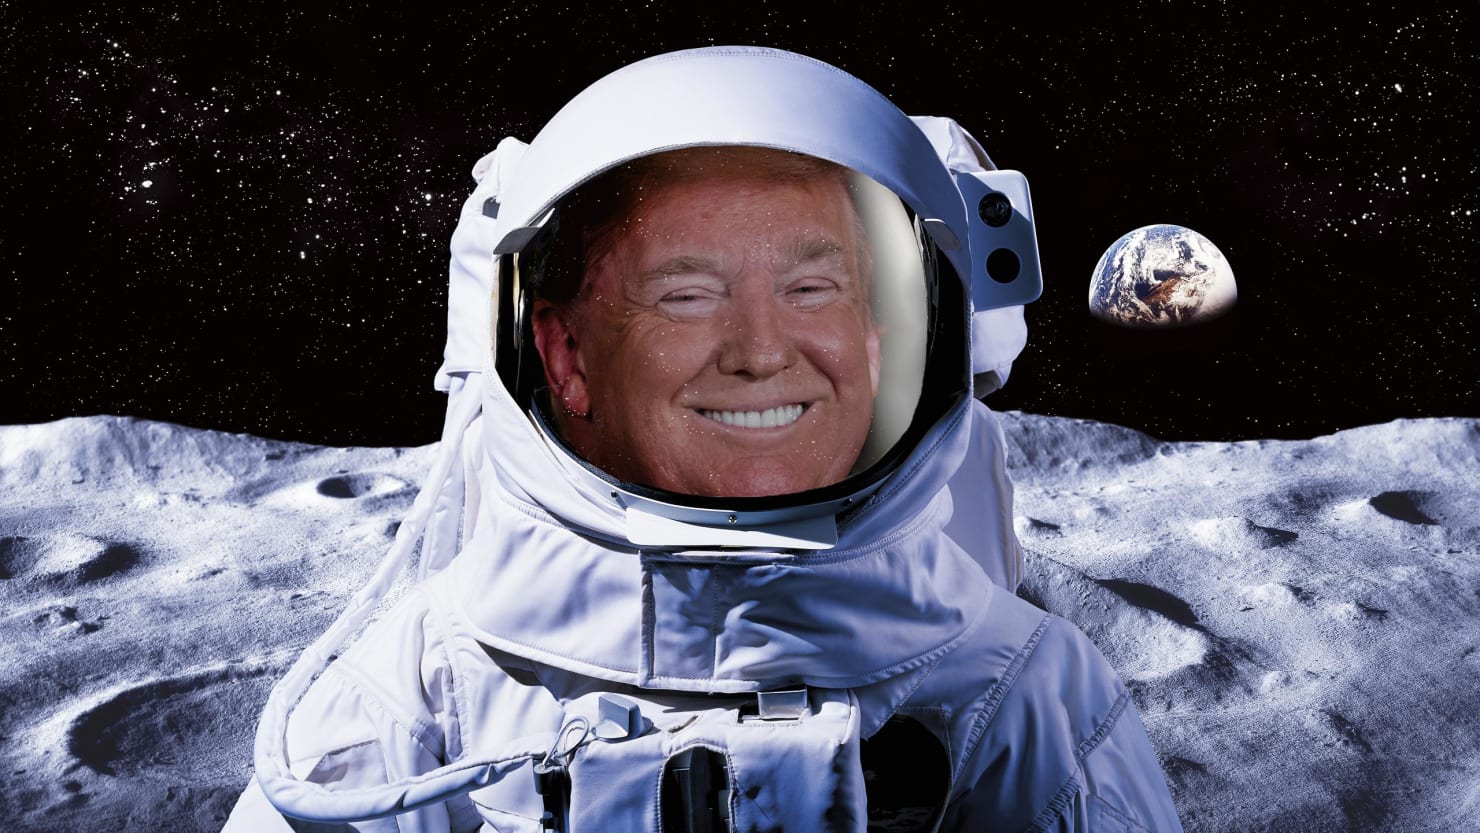 Is Trump’s ‘Space Force’ Against Space Law?